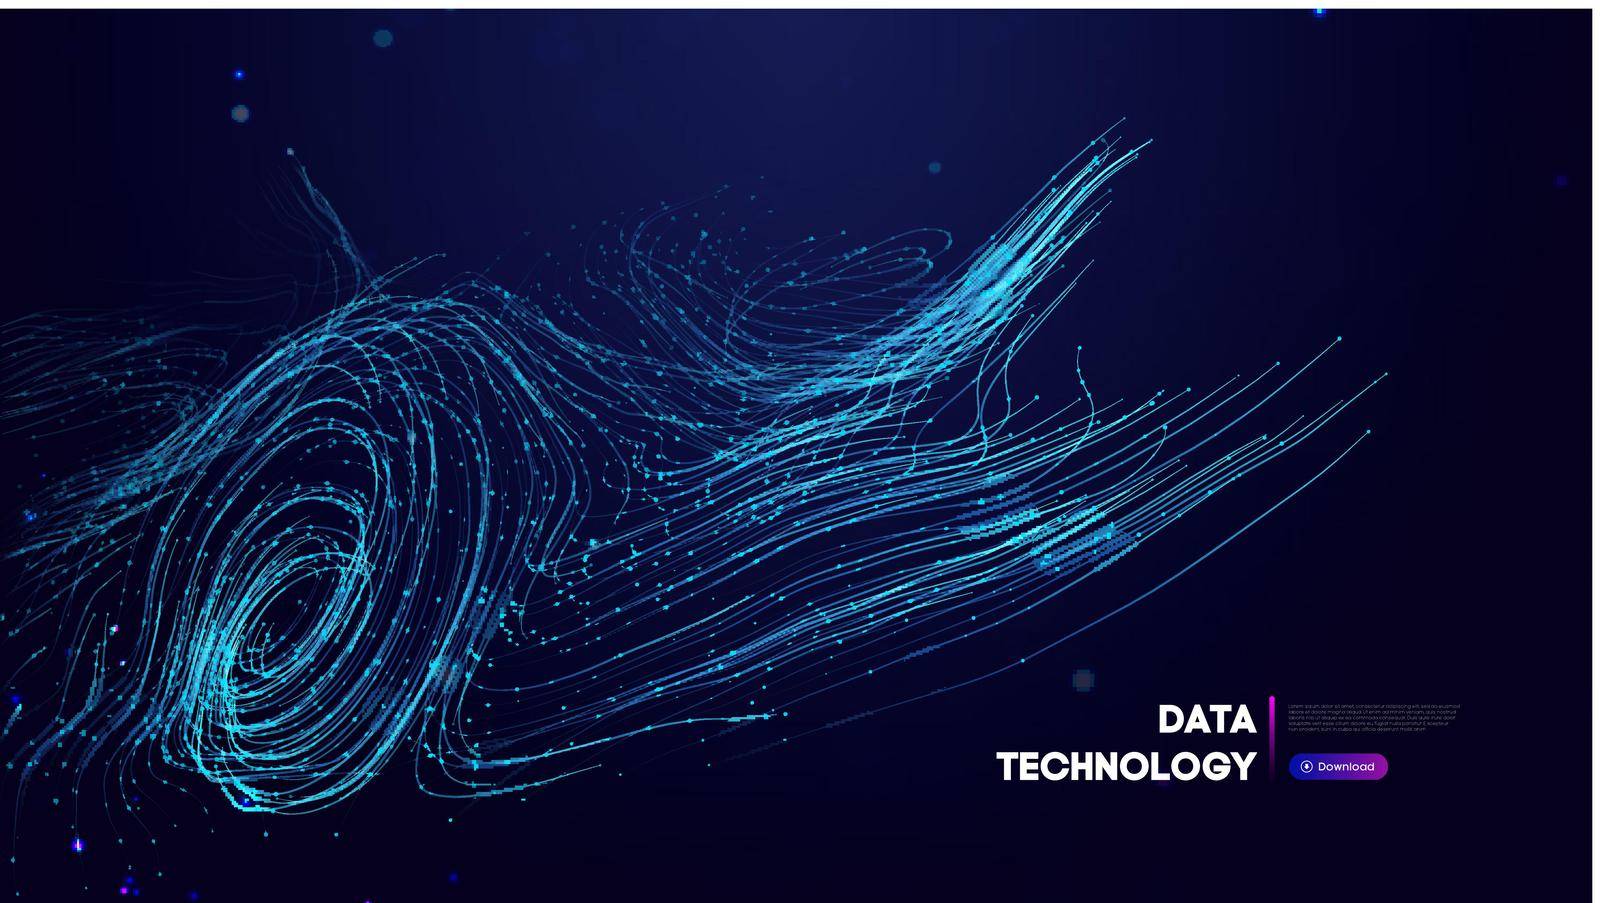 Big Data Technology vector illustration. Abstract blurred data business colored.